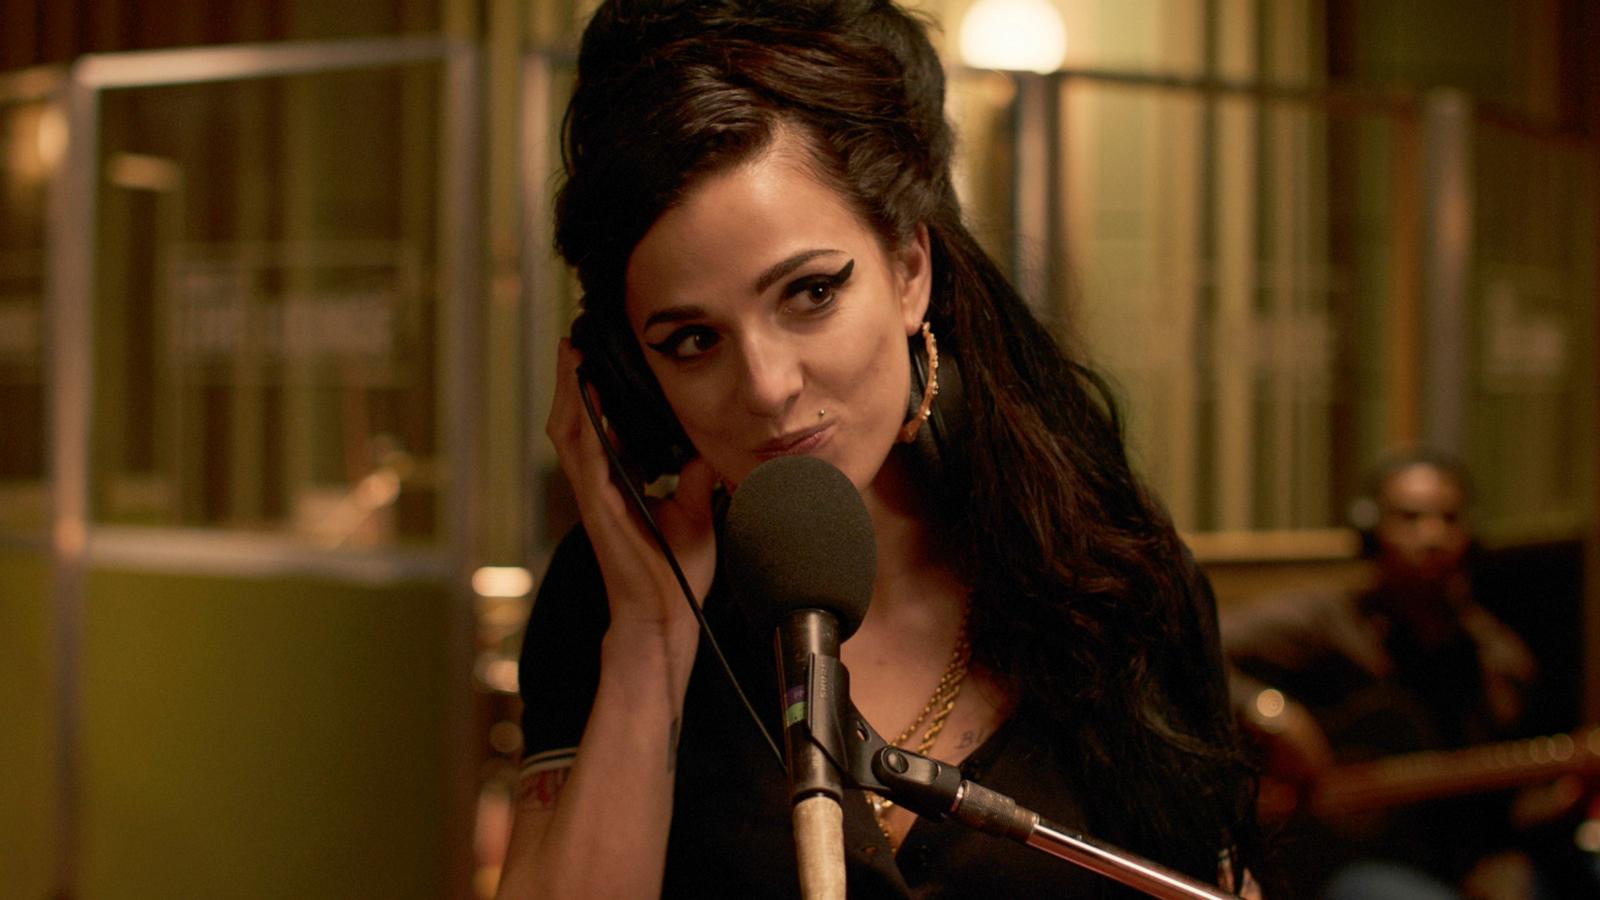 PHOTO: This image released by Focus Features shows Marisa Abela as Amy Winehouse in a scene from "Back to Black."